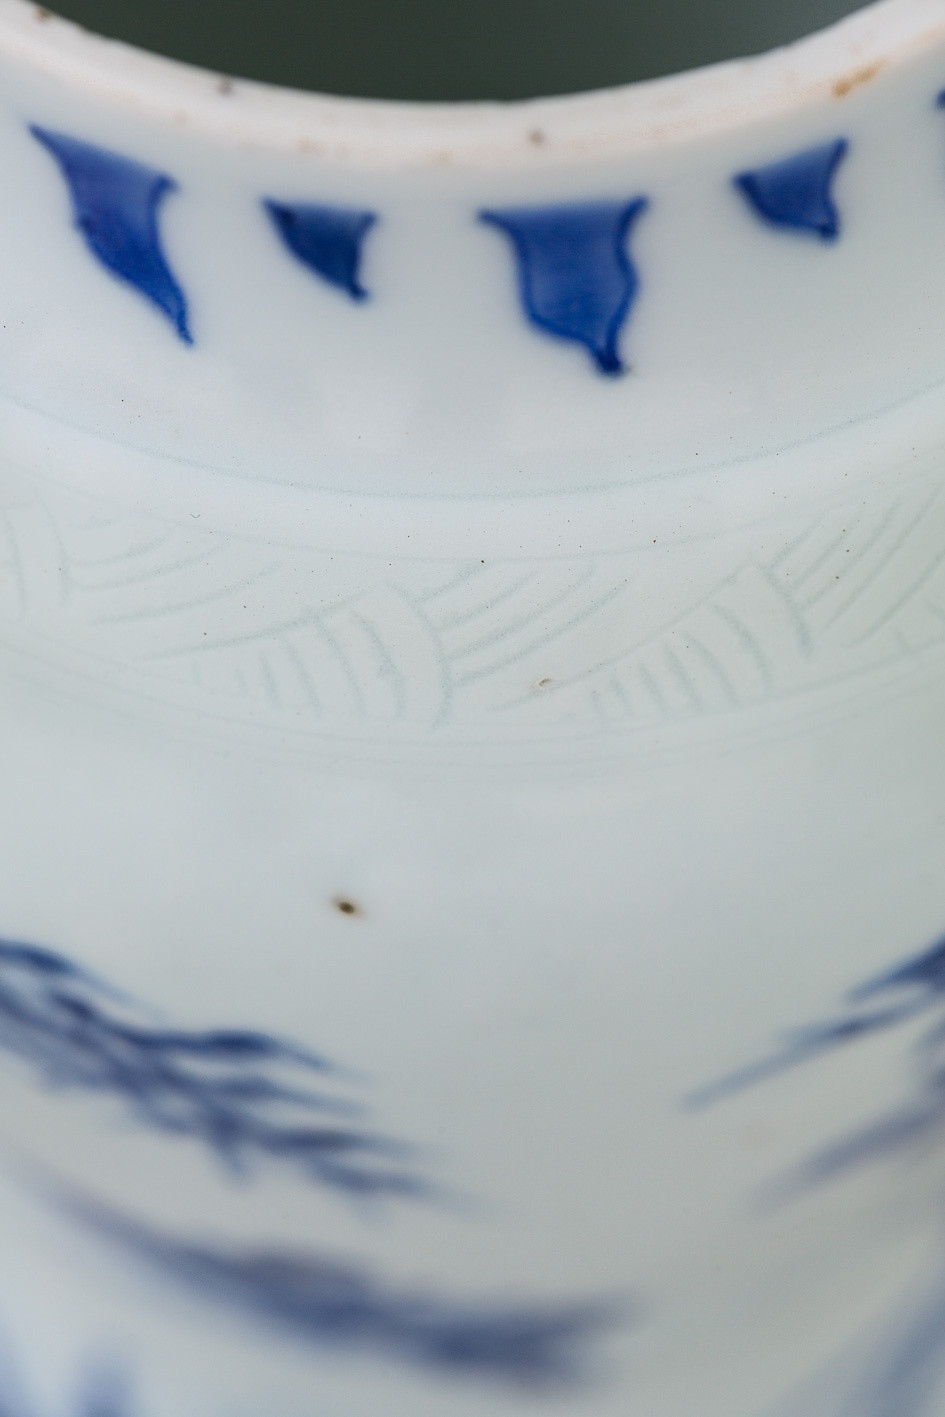 large asian vase of a chinese transitional blue and white vase shunzhi 1644 1661 pertaining to a chinese transitional blue and white vase